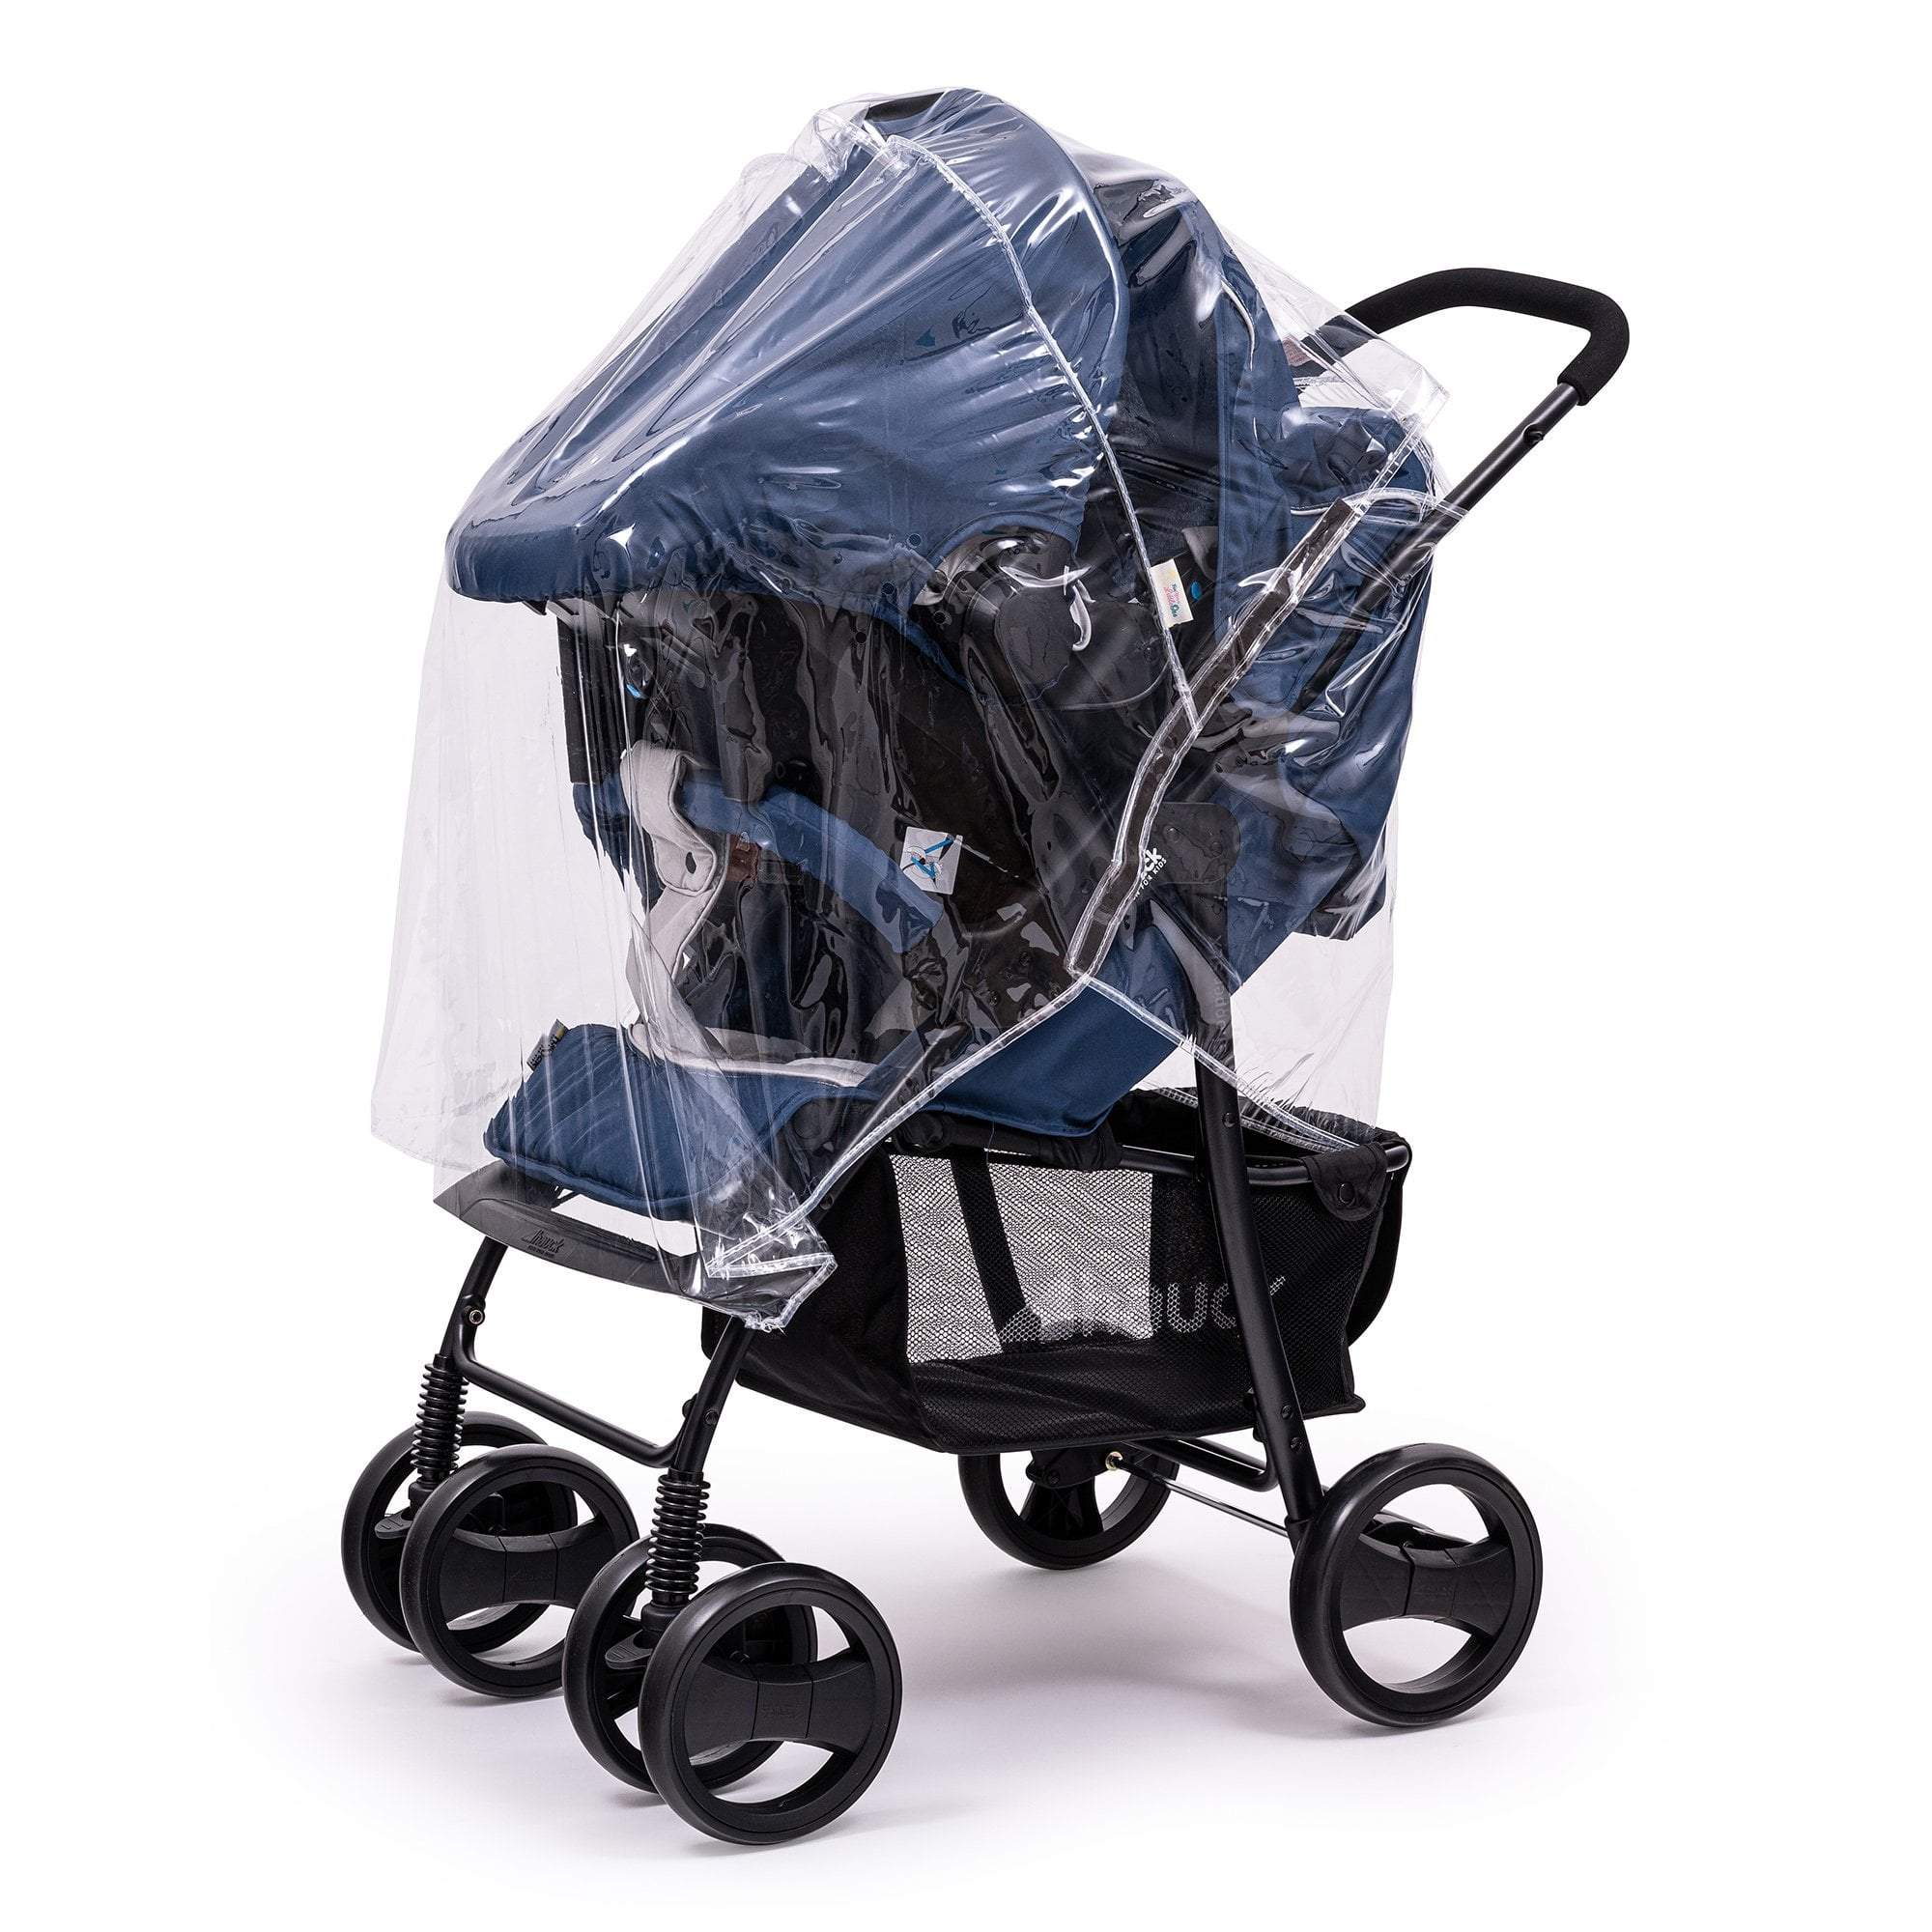 Travel System Raincover Compatible with Egg - Fits All Models - For Your Little One